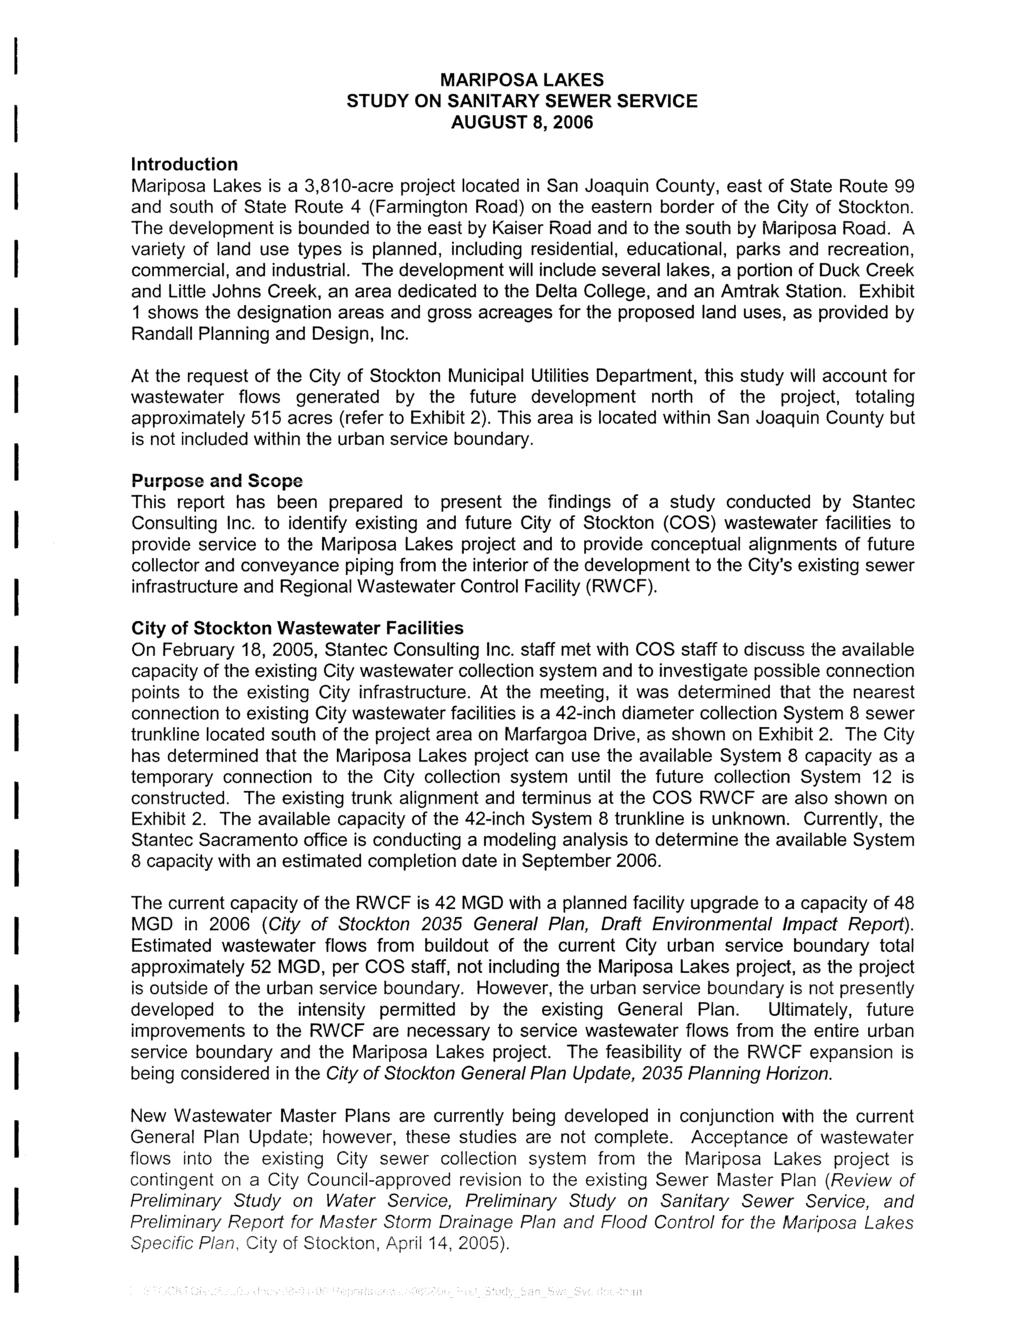 MARIPOSA LAKES STUDY ON SANITARY SEWER SERVICE AUGUST 8,2006 Introduction Mariposa Lakes is a 3,810-acre project located in San Joaquin County, east of State Route 99 and south of State Route 4